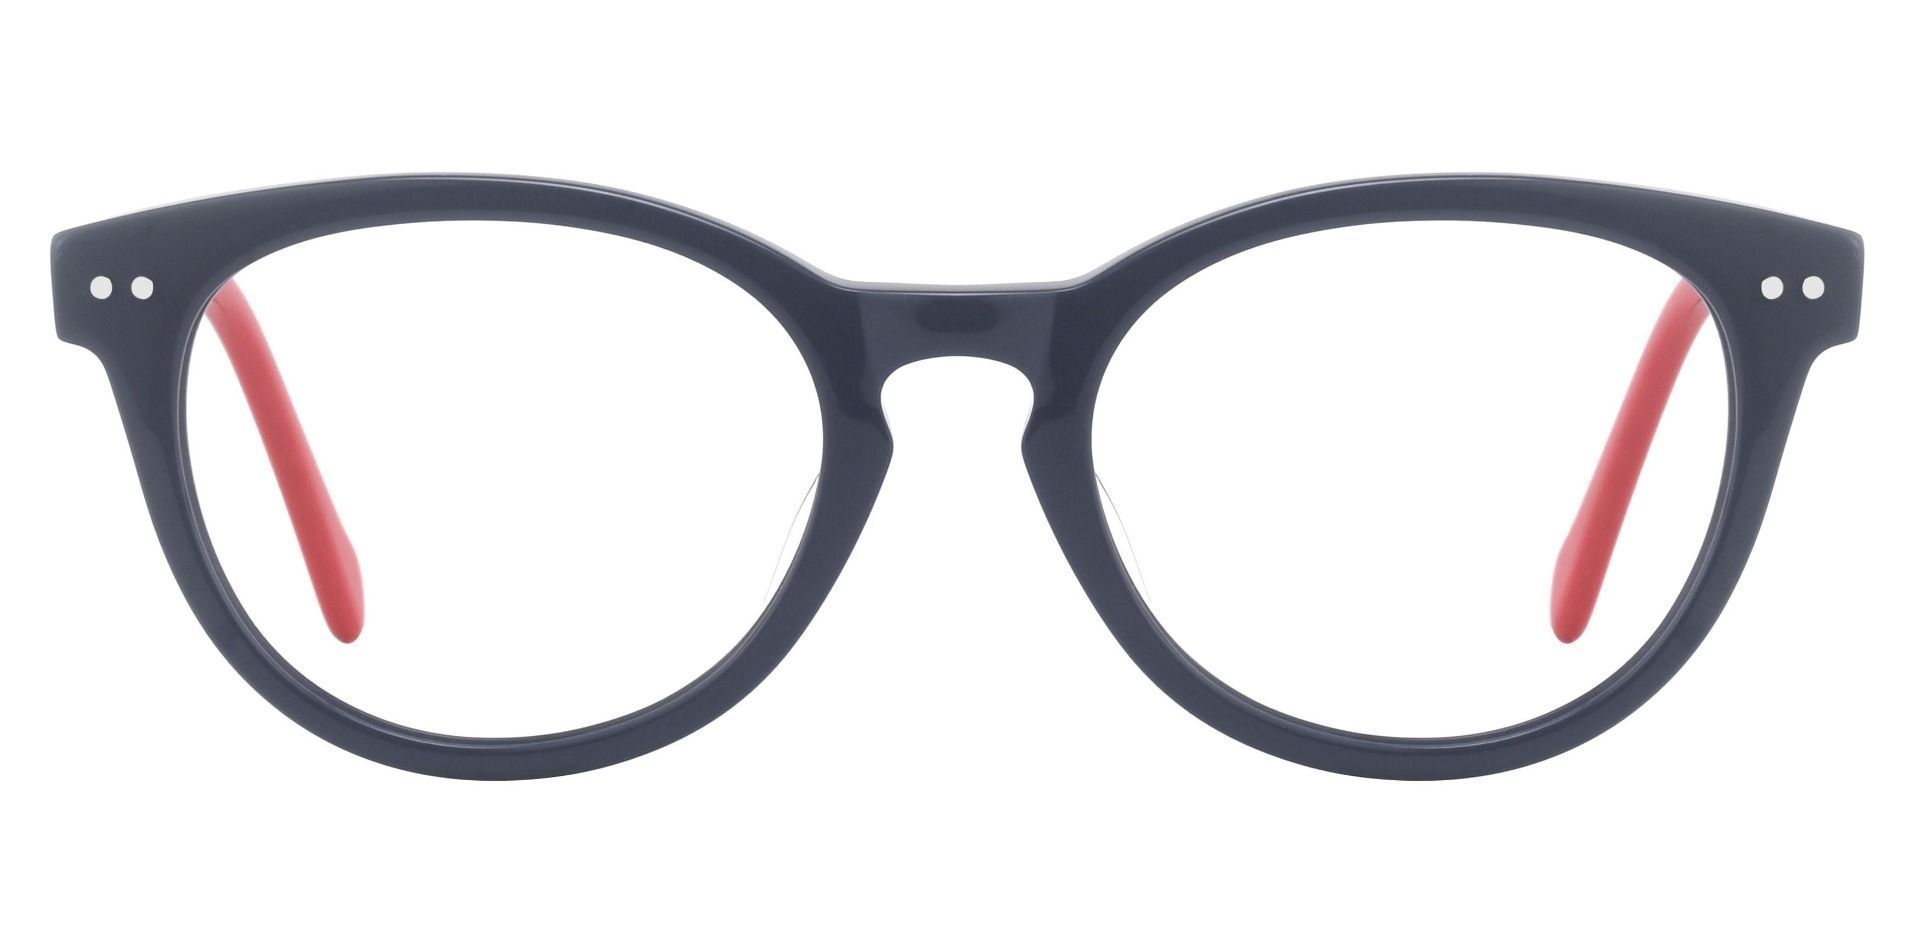 Revere Oval Eyeglasses Frame - The Frame Is Blue And Red